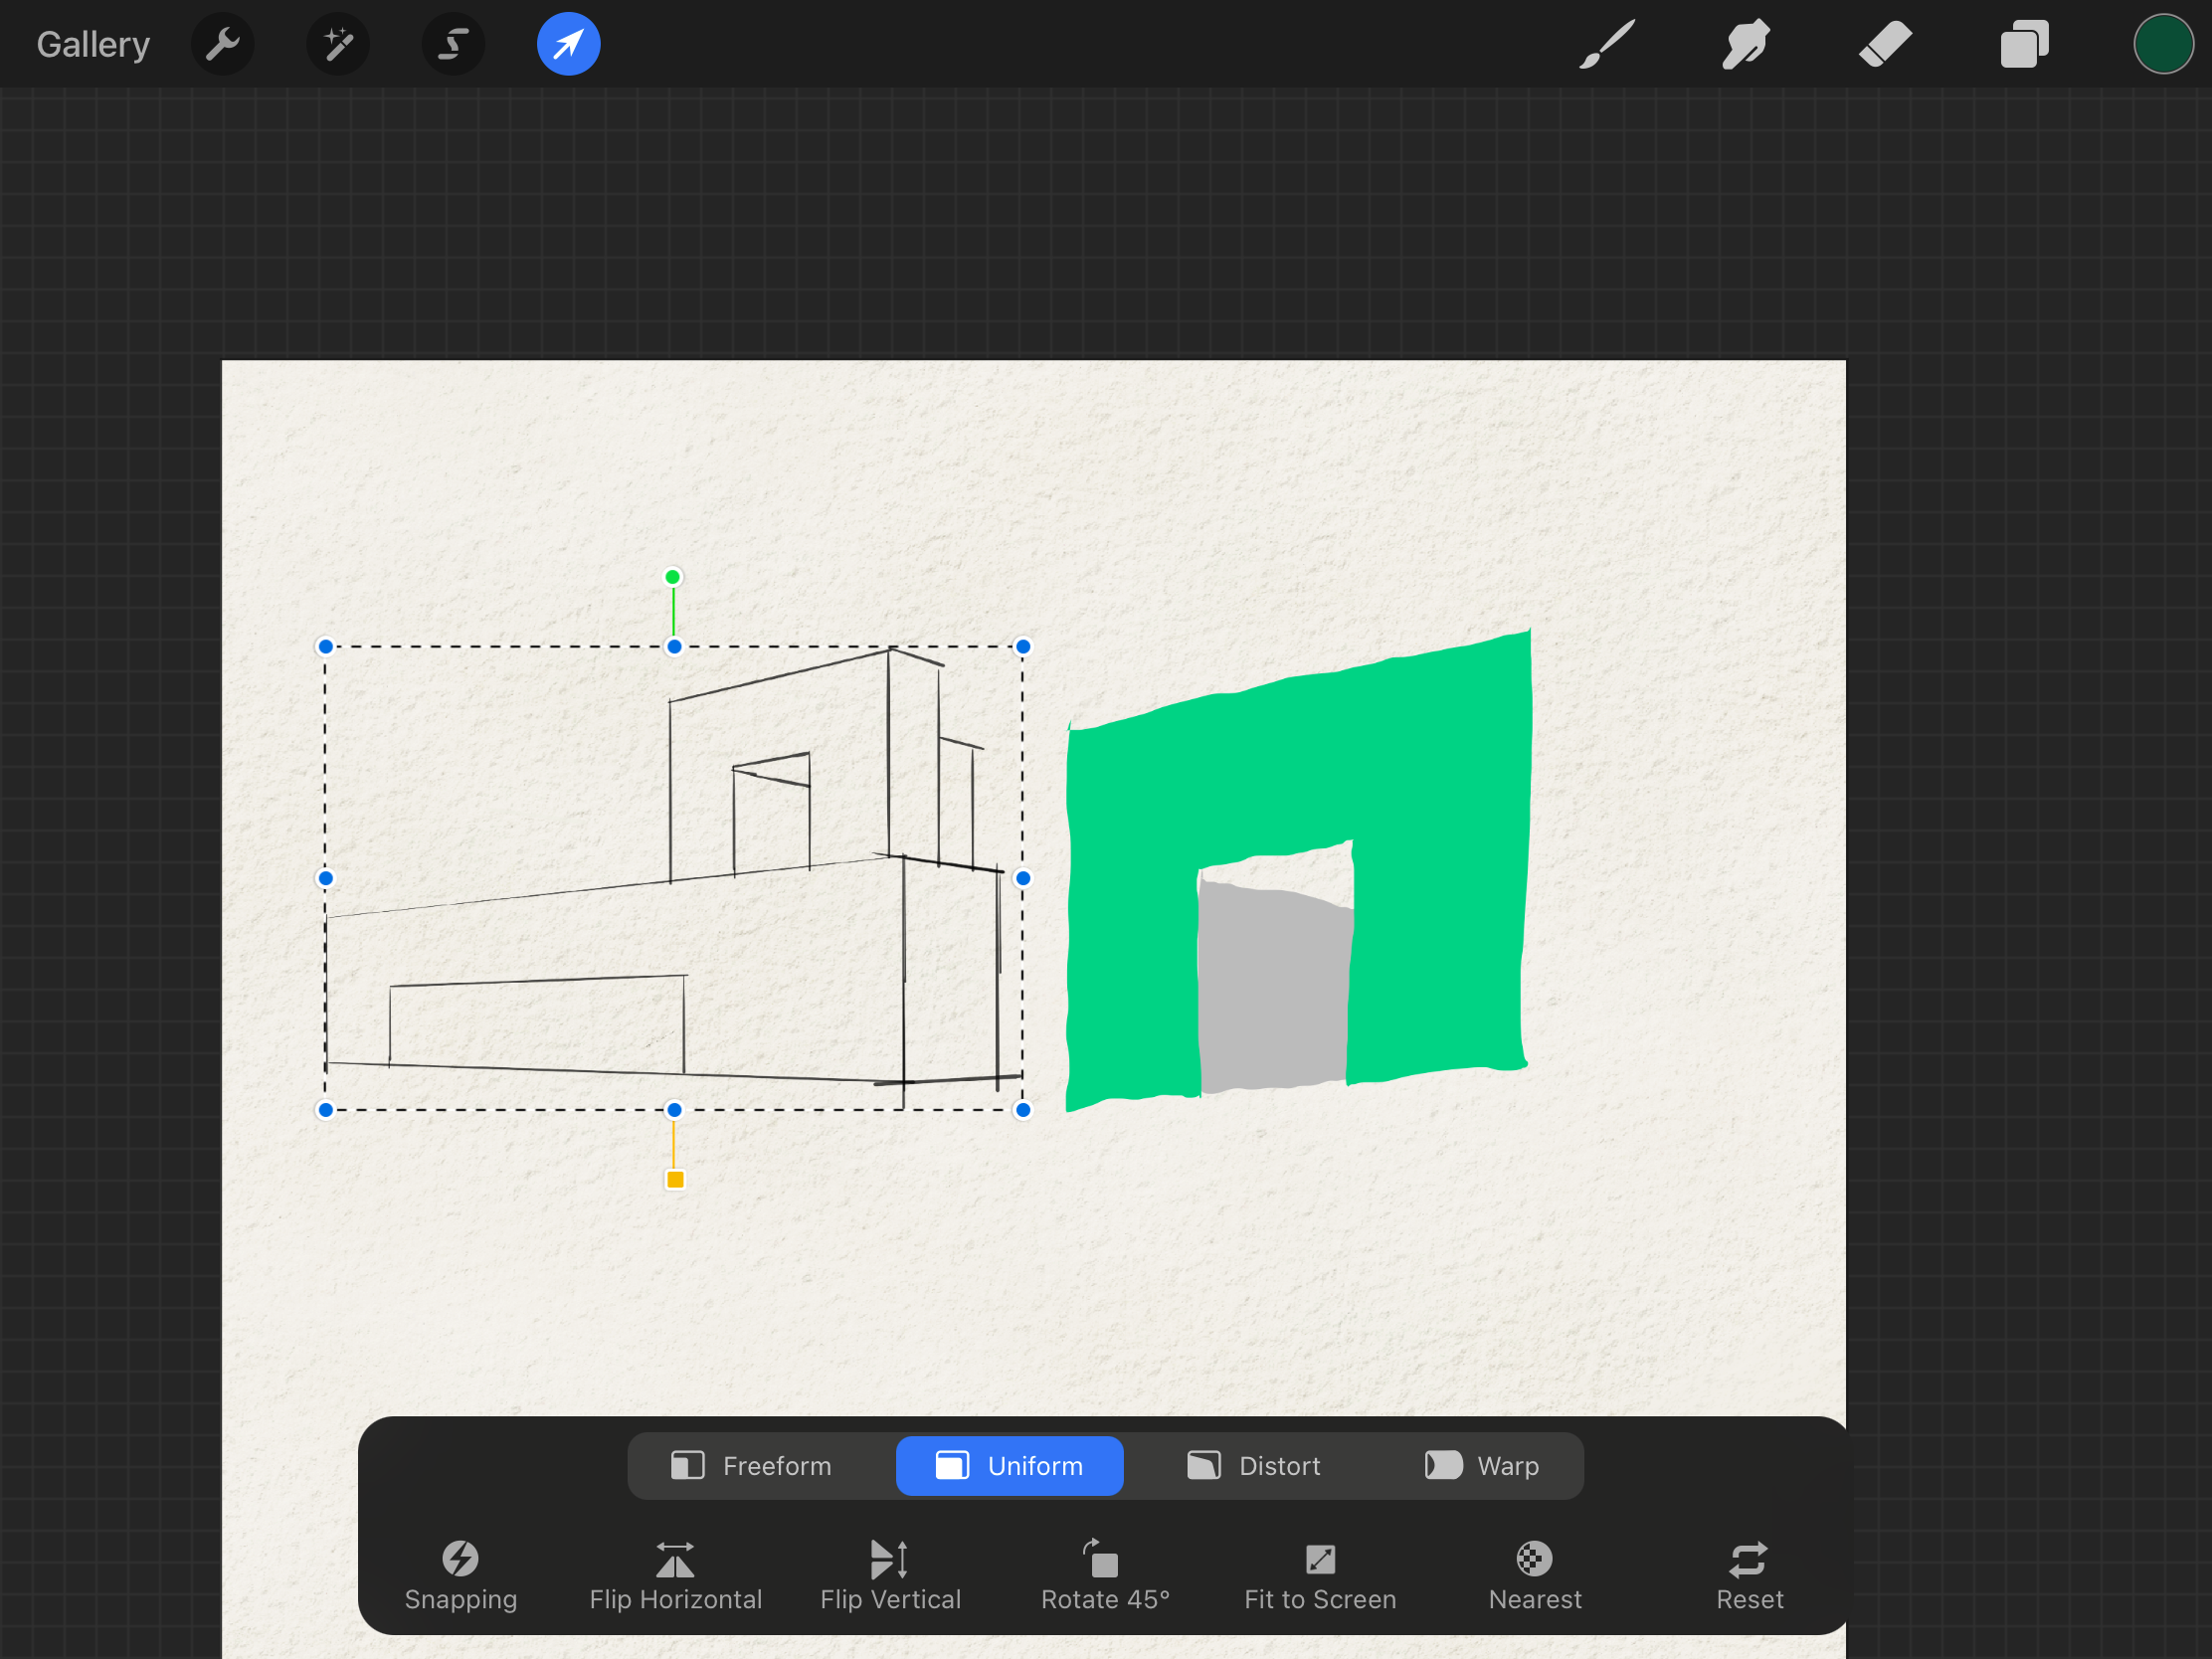 It shows how to use the transform tool to edit the location and size of elements.